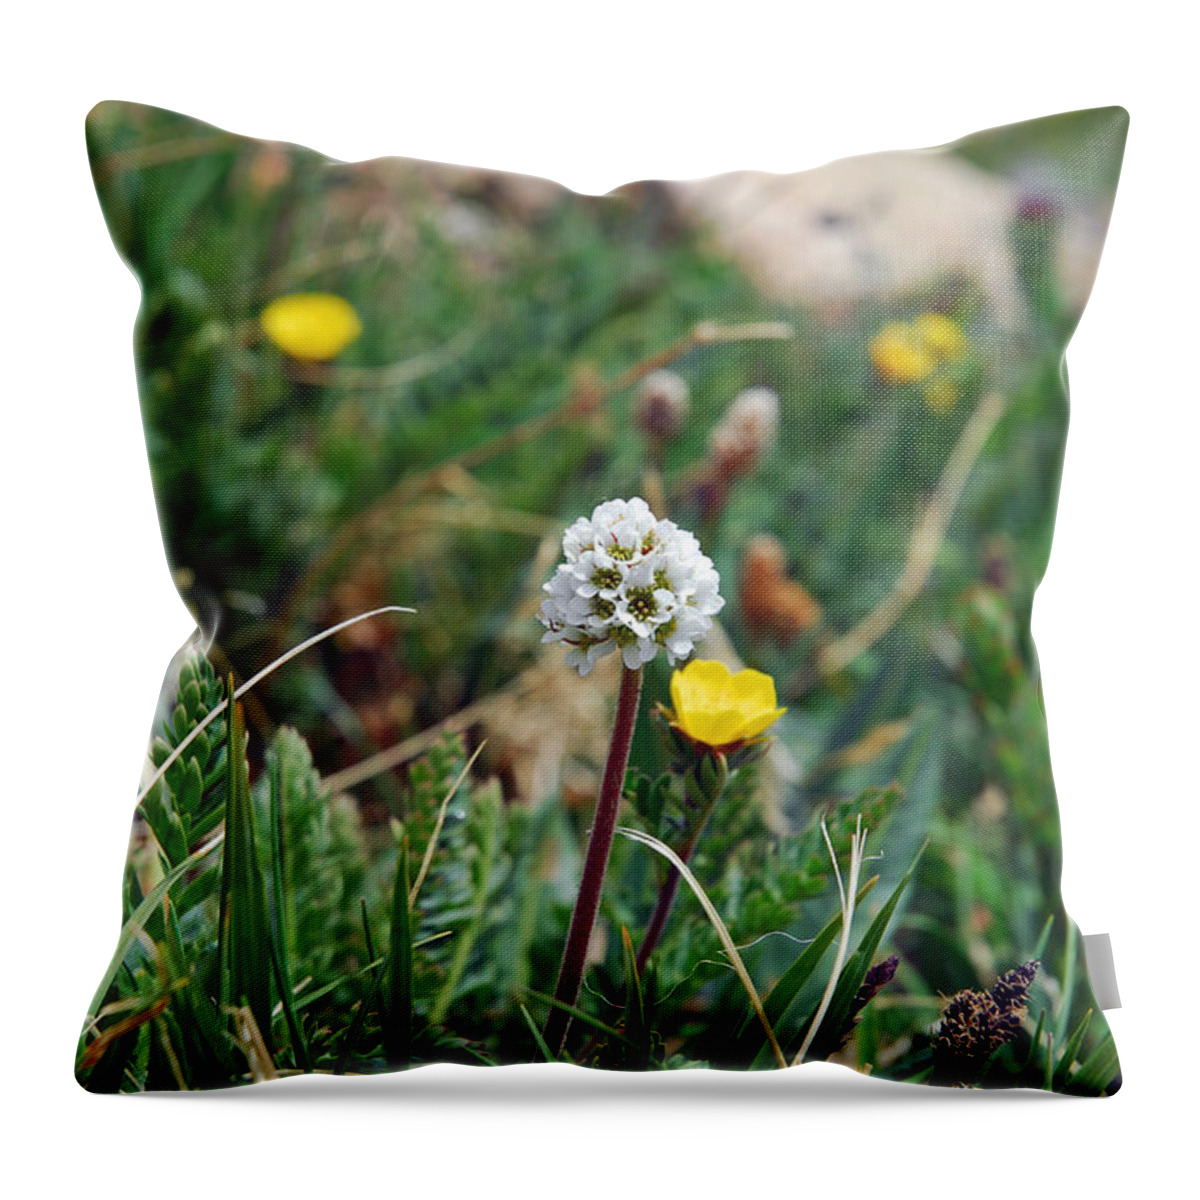 Wildflower Throw Pillow featuring the photograph Summit Lake White Globe by Robert Meyers-Lussier